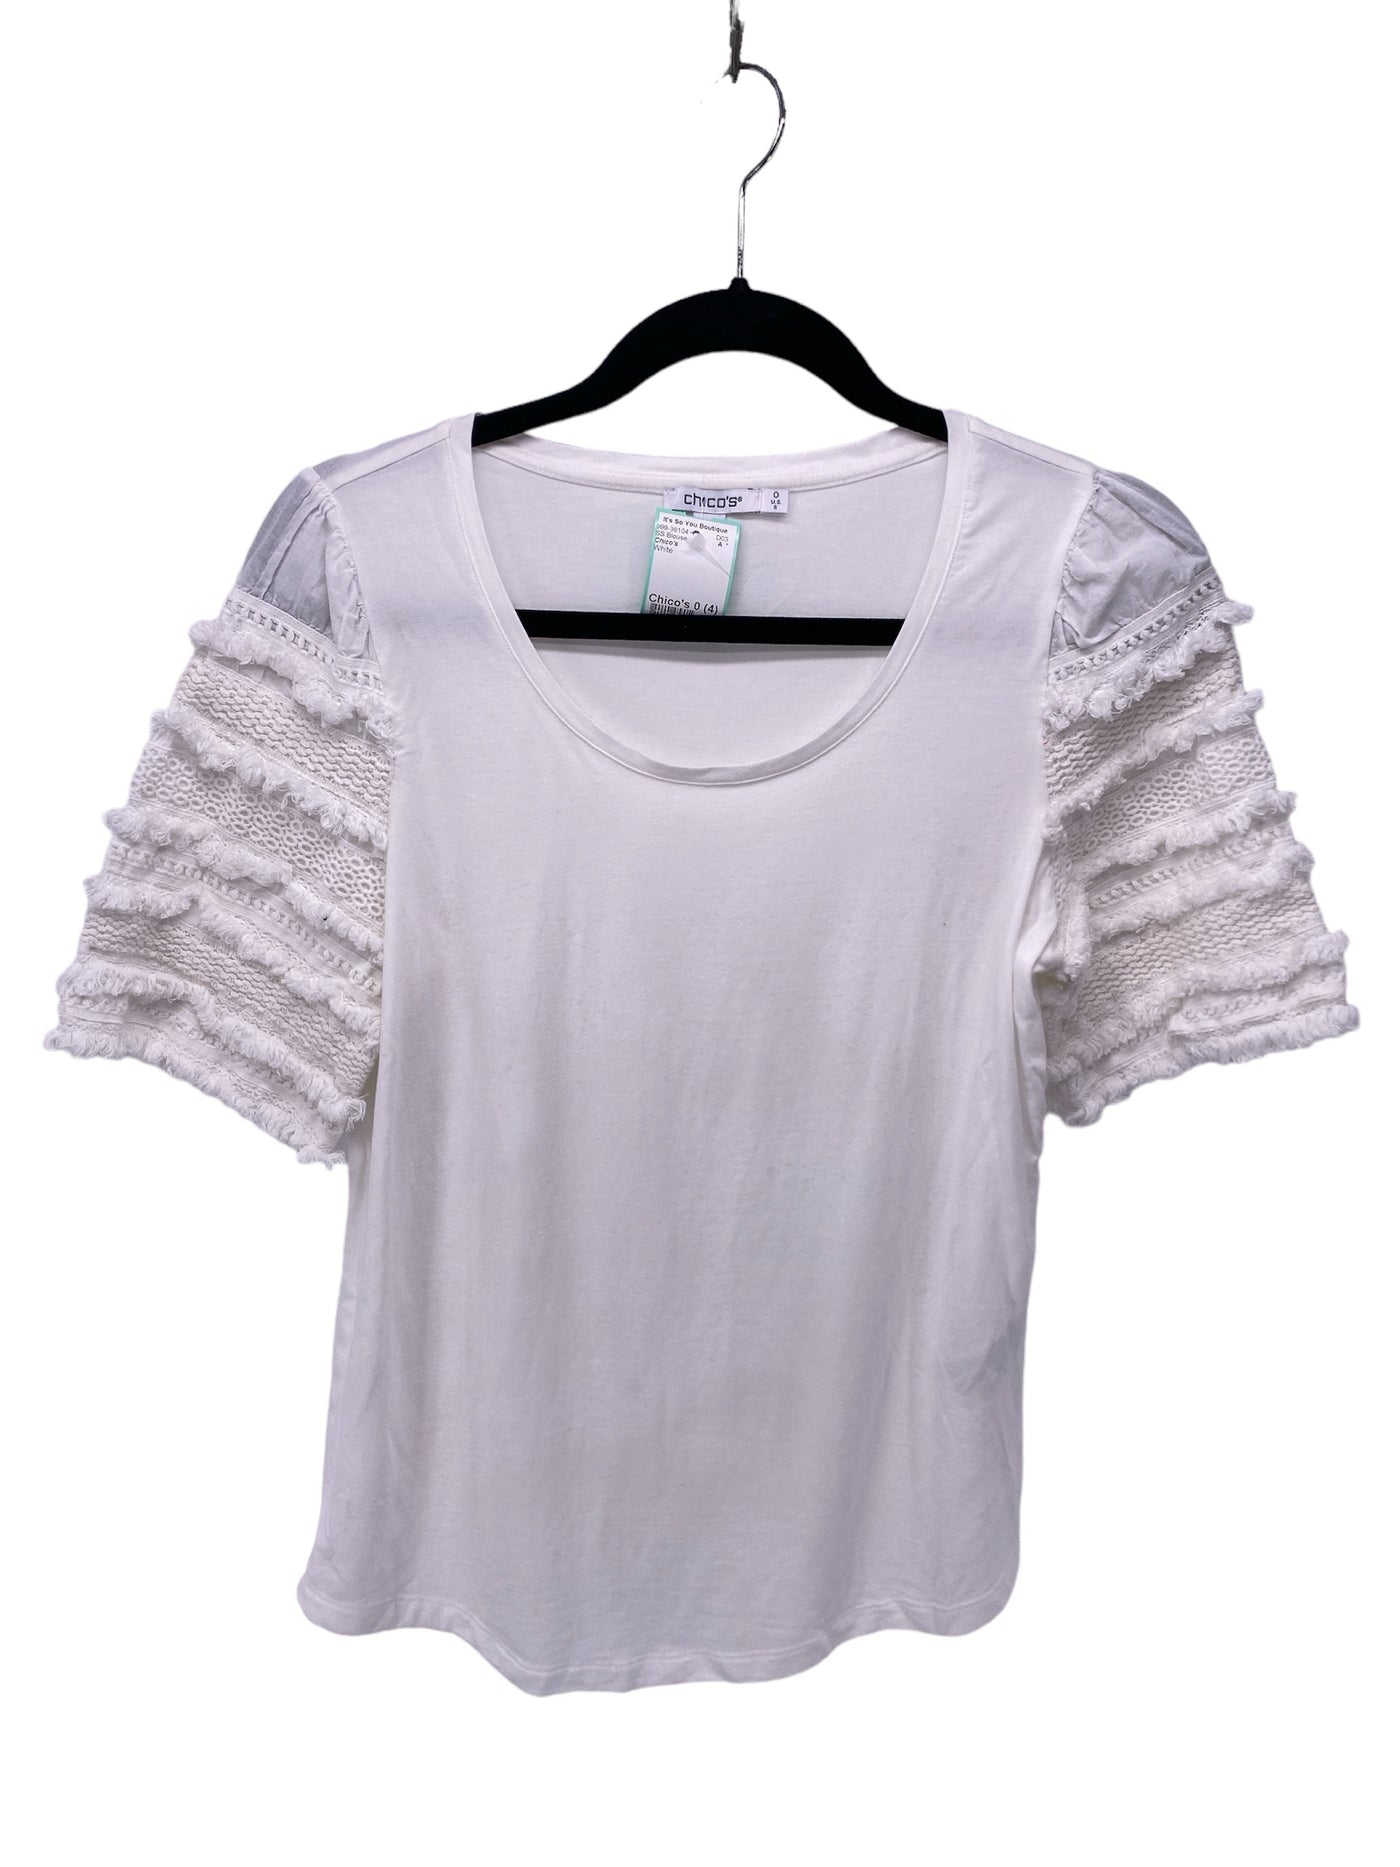 Chico's Misses Size Chico's 0 (4) White SS Blouse